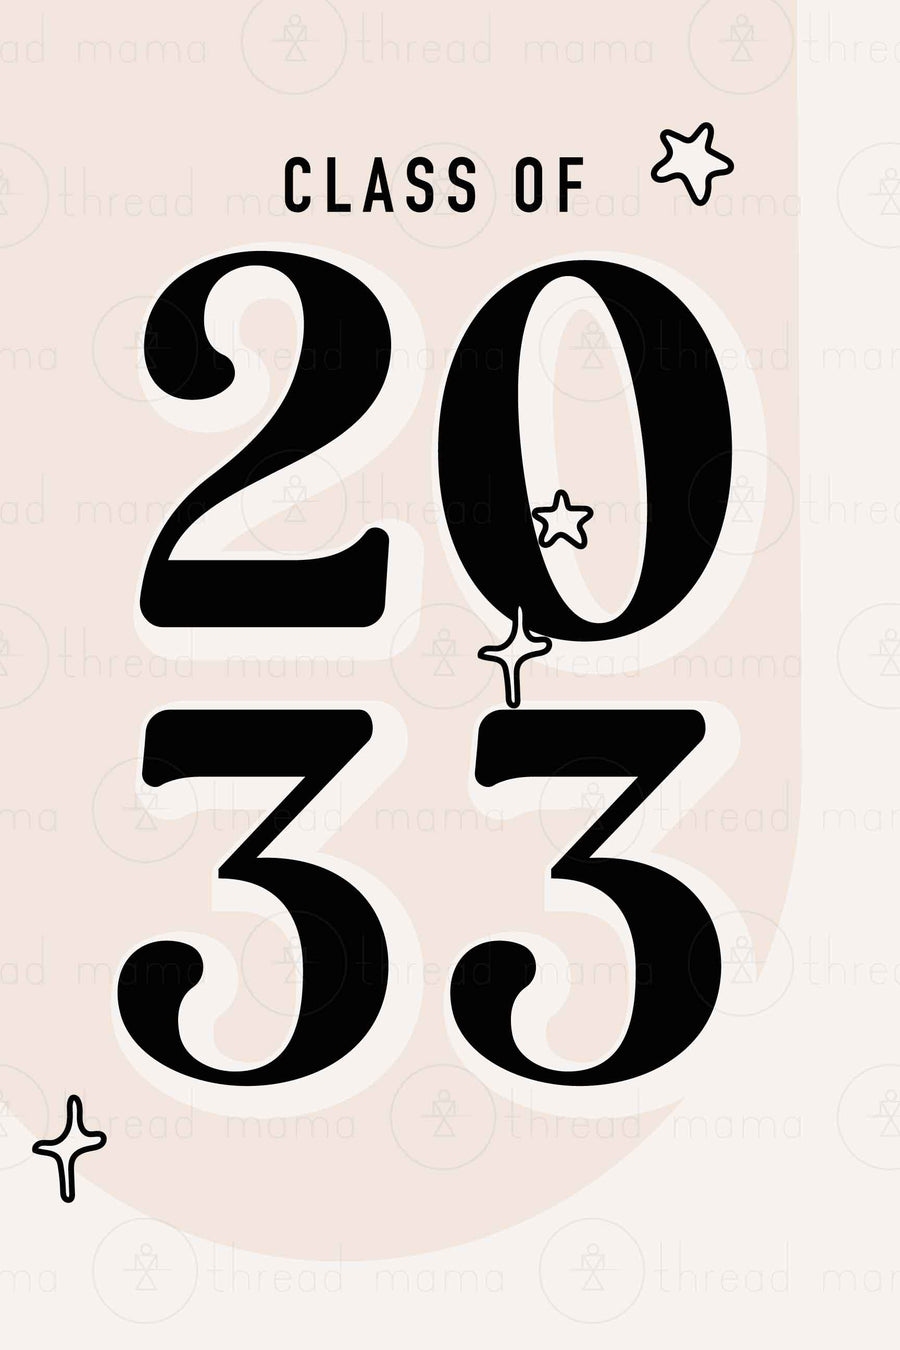 Class of 2021 / 2033 Collection Two (Printable Poster)